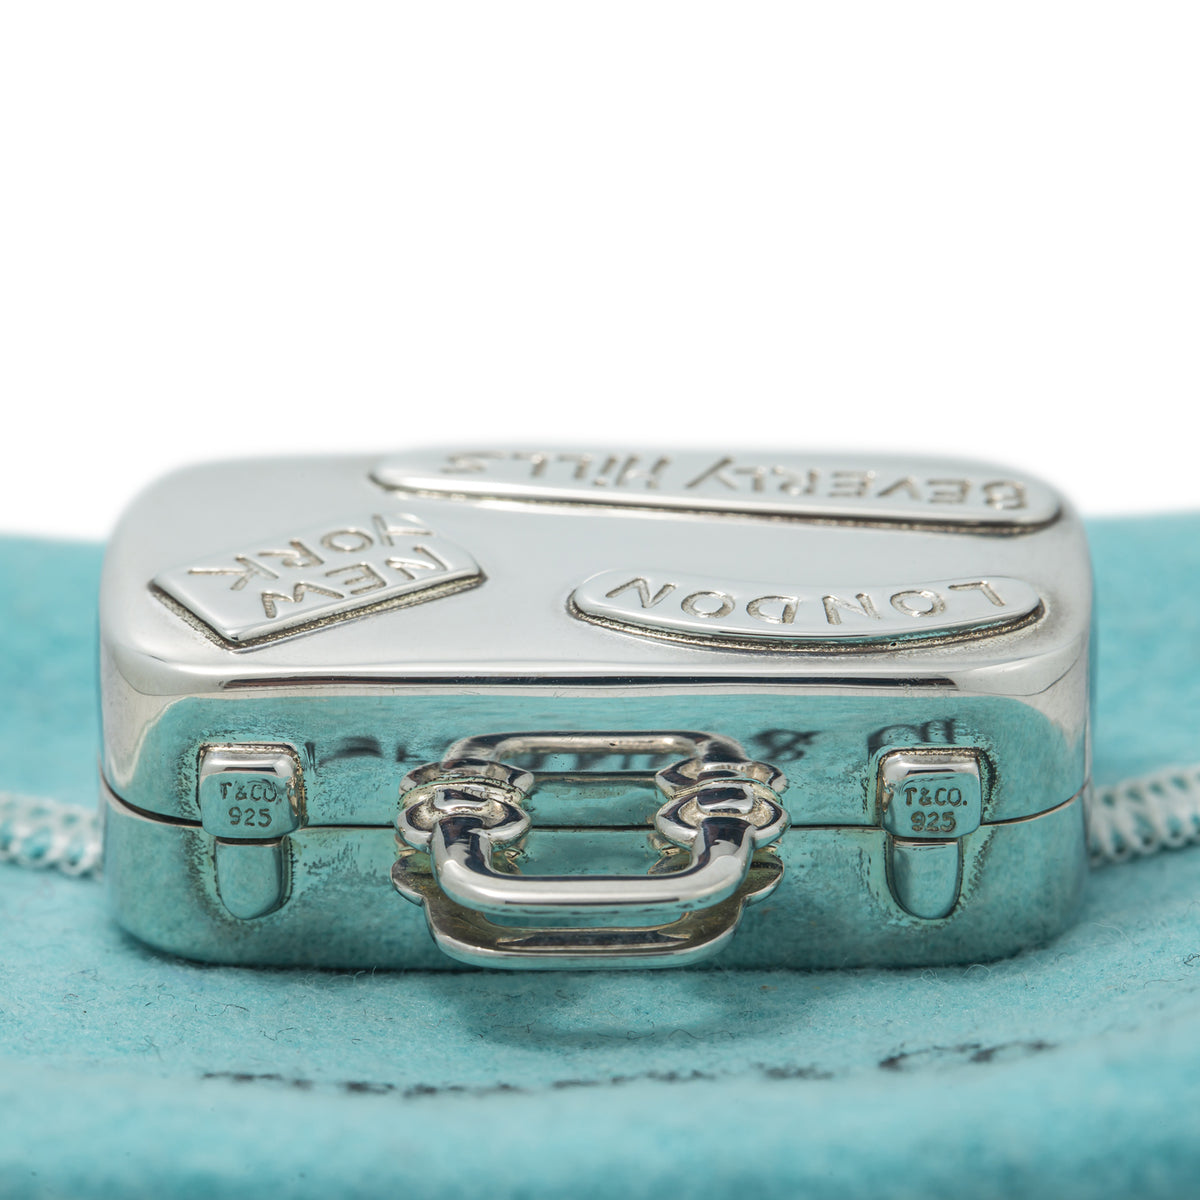 Tiffany & Co Sterling Silver 925 Suitcase World Travel Pill Box 44mmx24mmx16mm